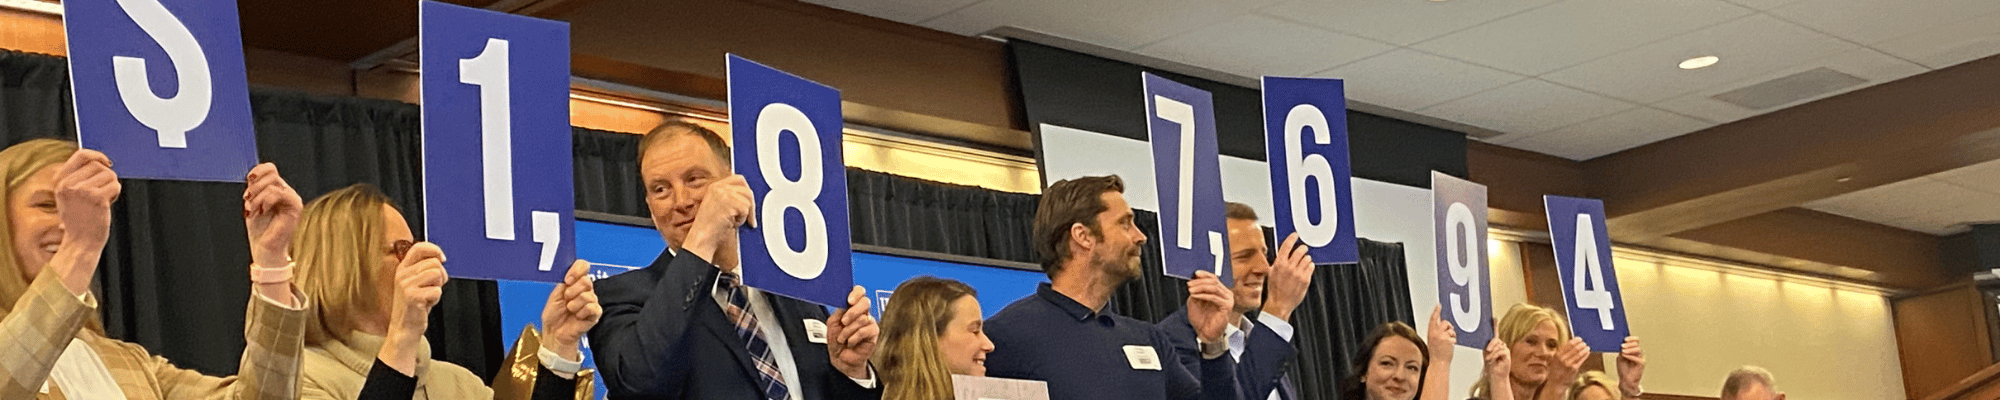 Photo of United Way volunteers holding blue numbers that show how much money the 2022 campaign raised, $1,877,694